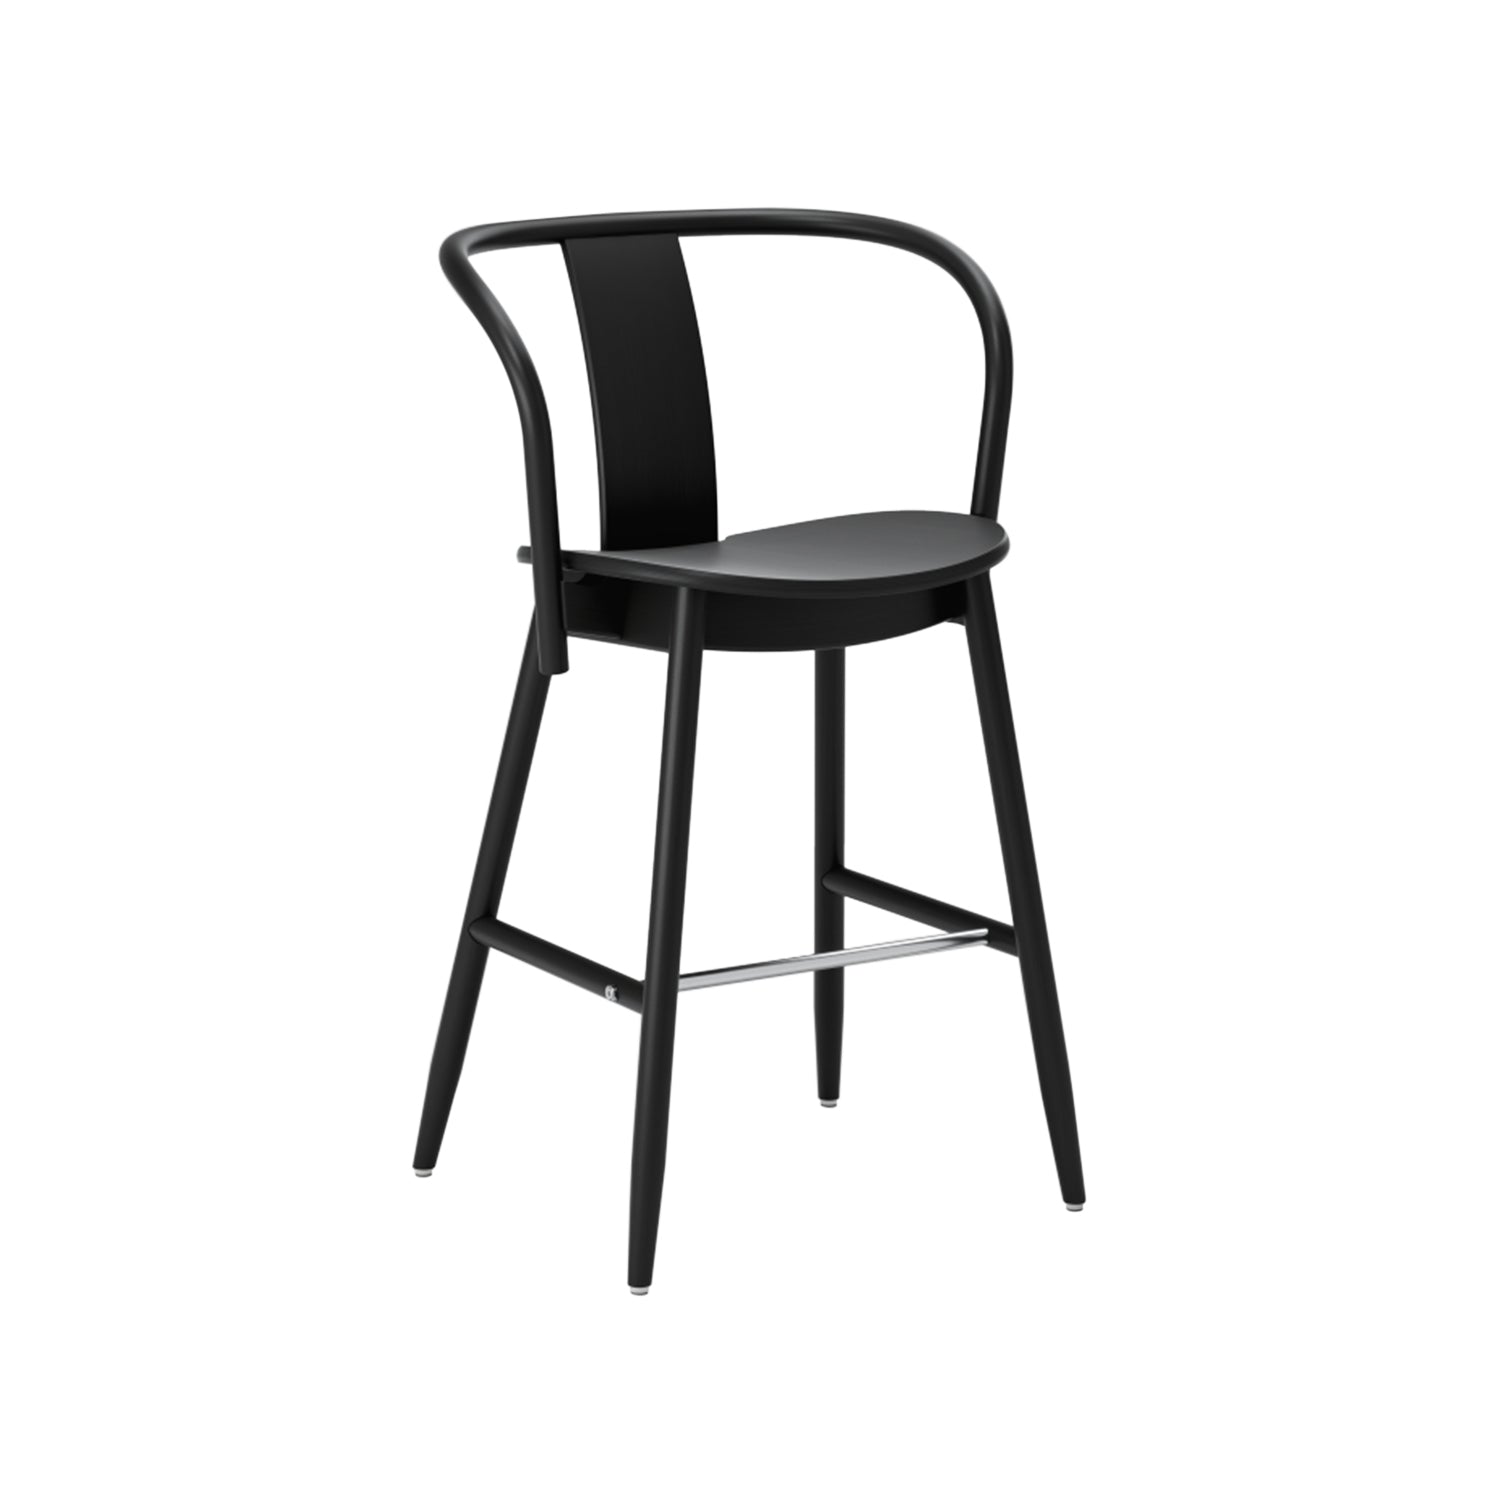 Icha Bar + Counter Chair: Counter + Black Stained Beech